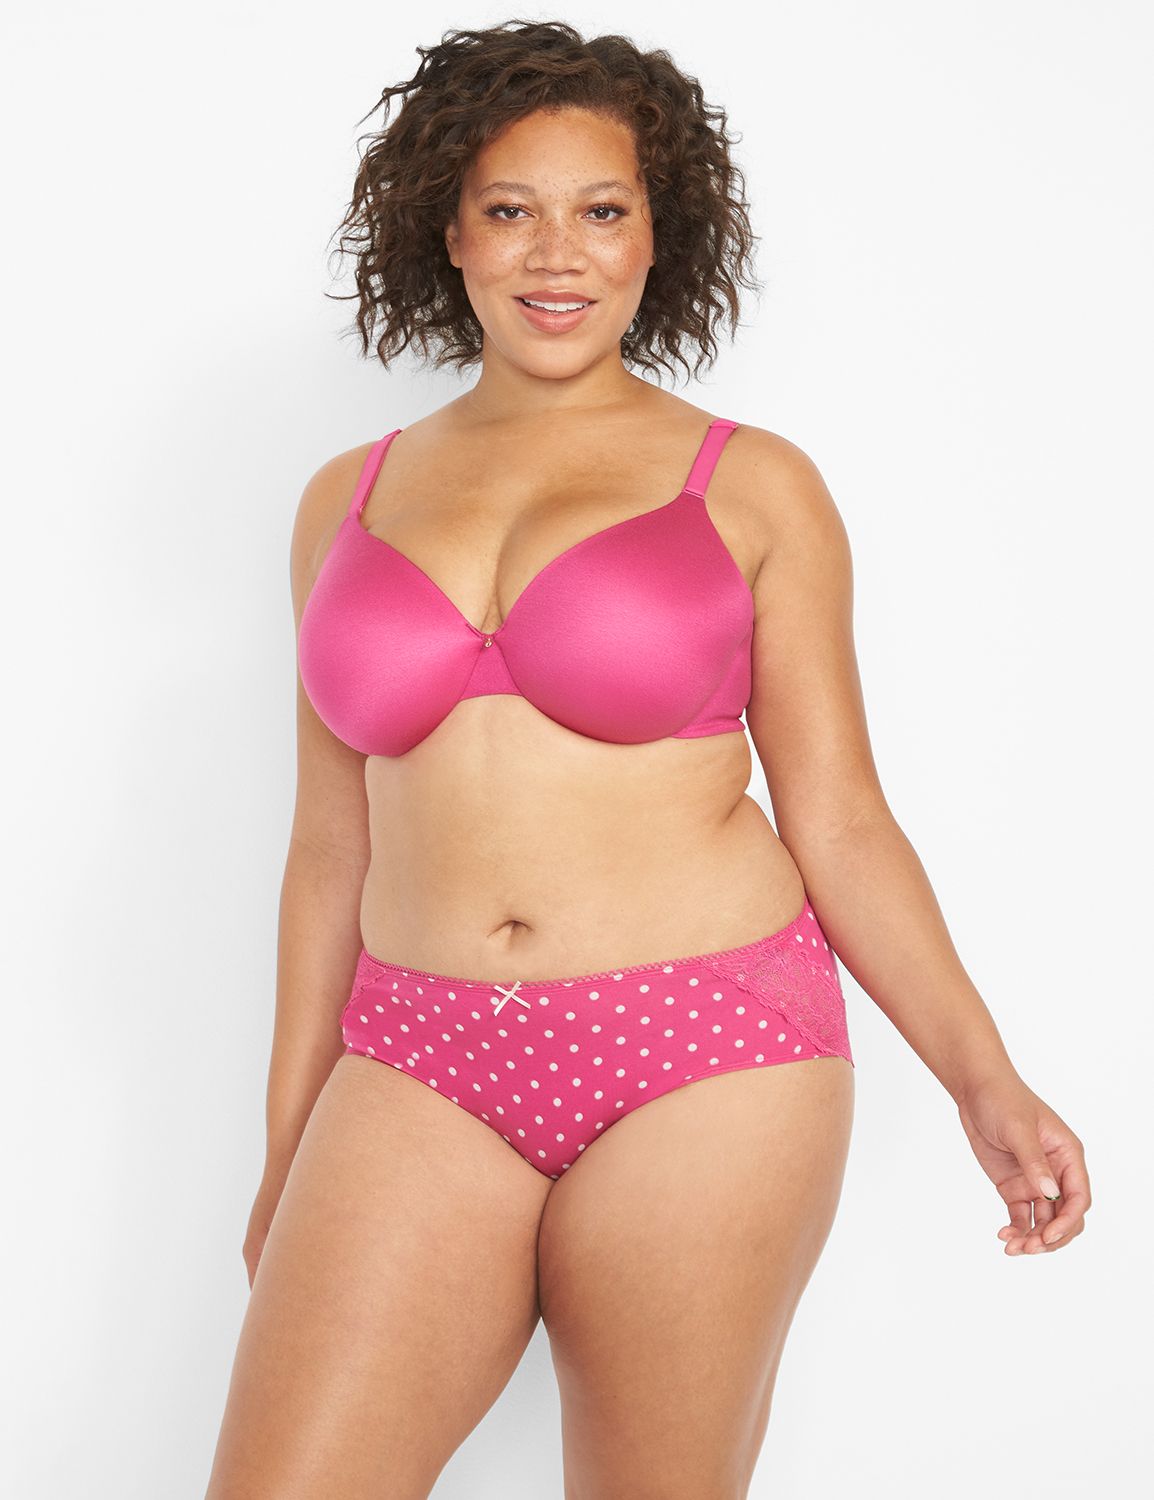 Lane Bryant - Your #1 go-to for sexy, supportive comfort? The name